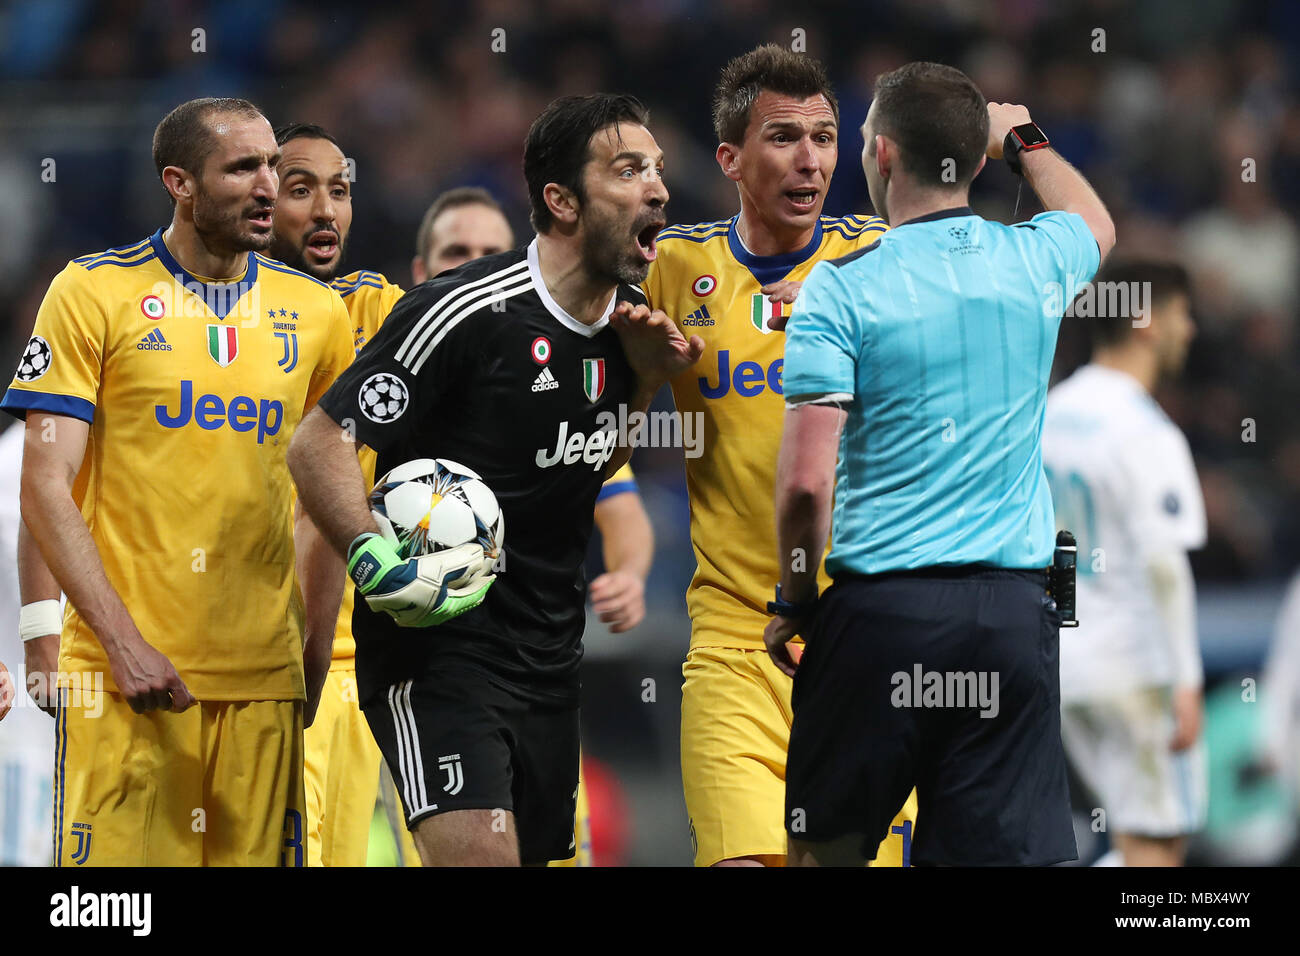 Madrid, Spain. 11th Apr, 2018. GIANLUIGI BUFFON of argues with referee MICHAEL OLIVER after receiving a red card during the UEFA Champions League, quarter final, 2nd leg football match between Real